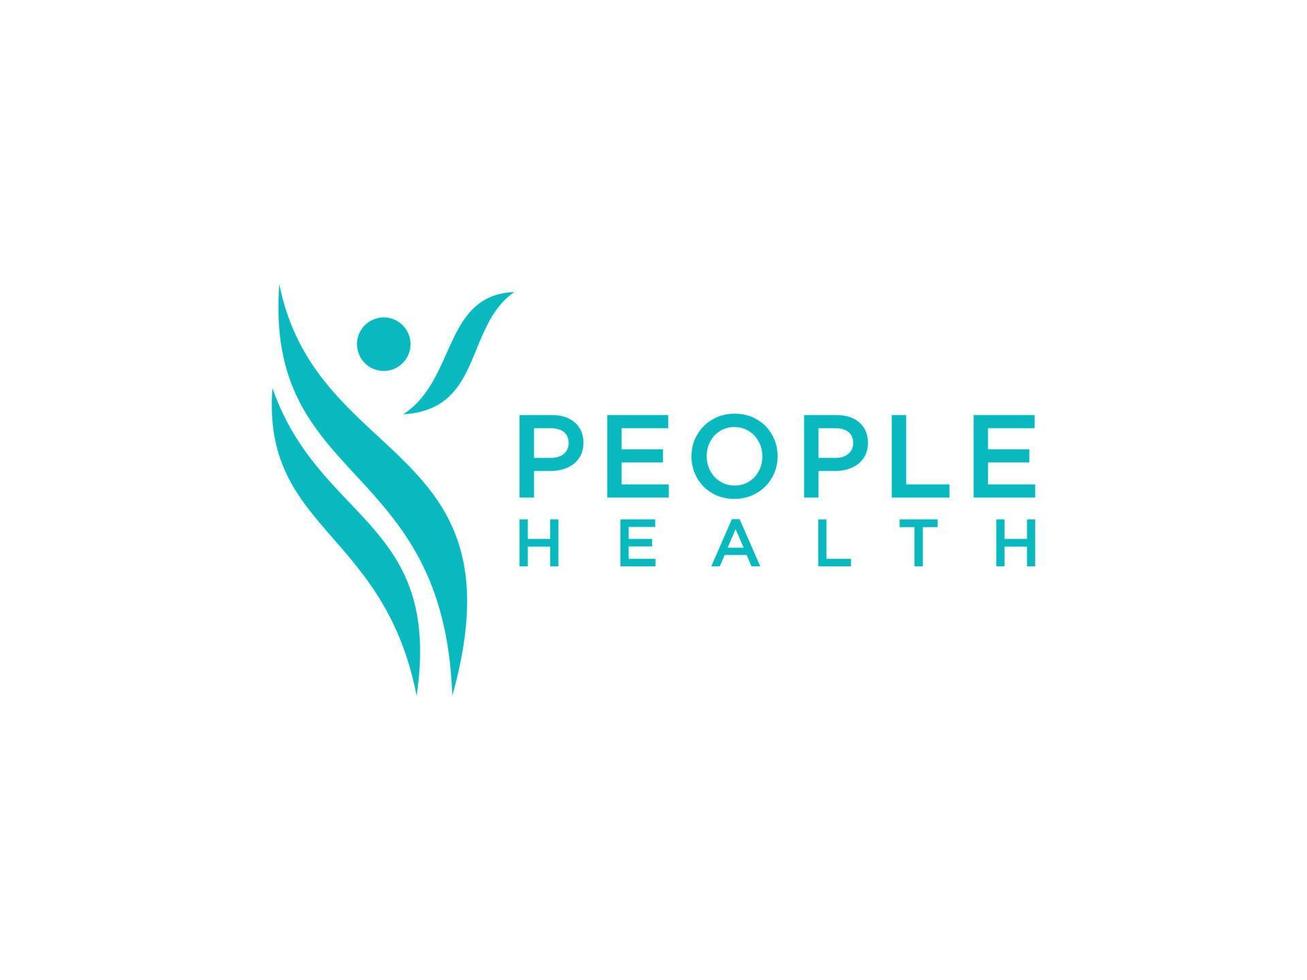 Abstract Health People Logo. Green and Blue Hand Drawn Human Icon Initial H Letter isolated on White Background. Flat Vector Logo Design Template Element.